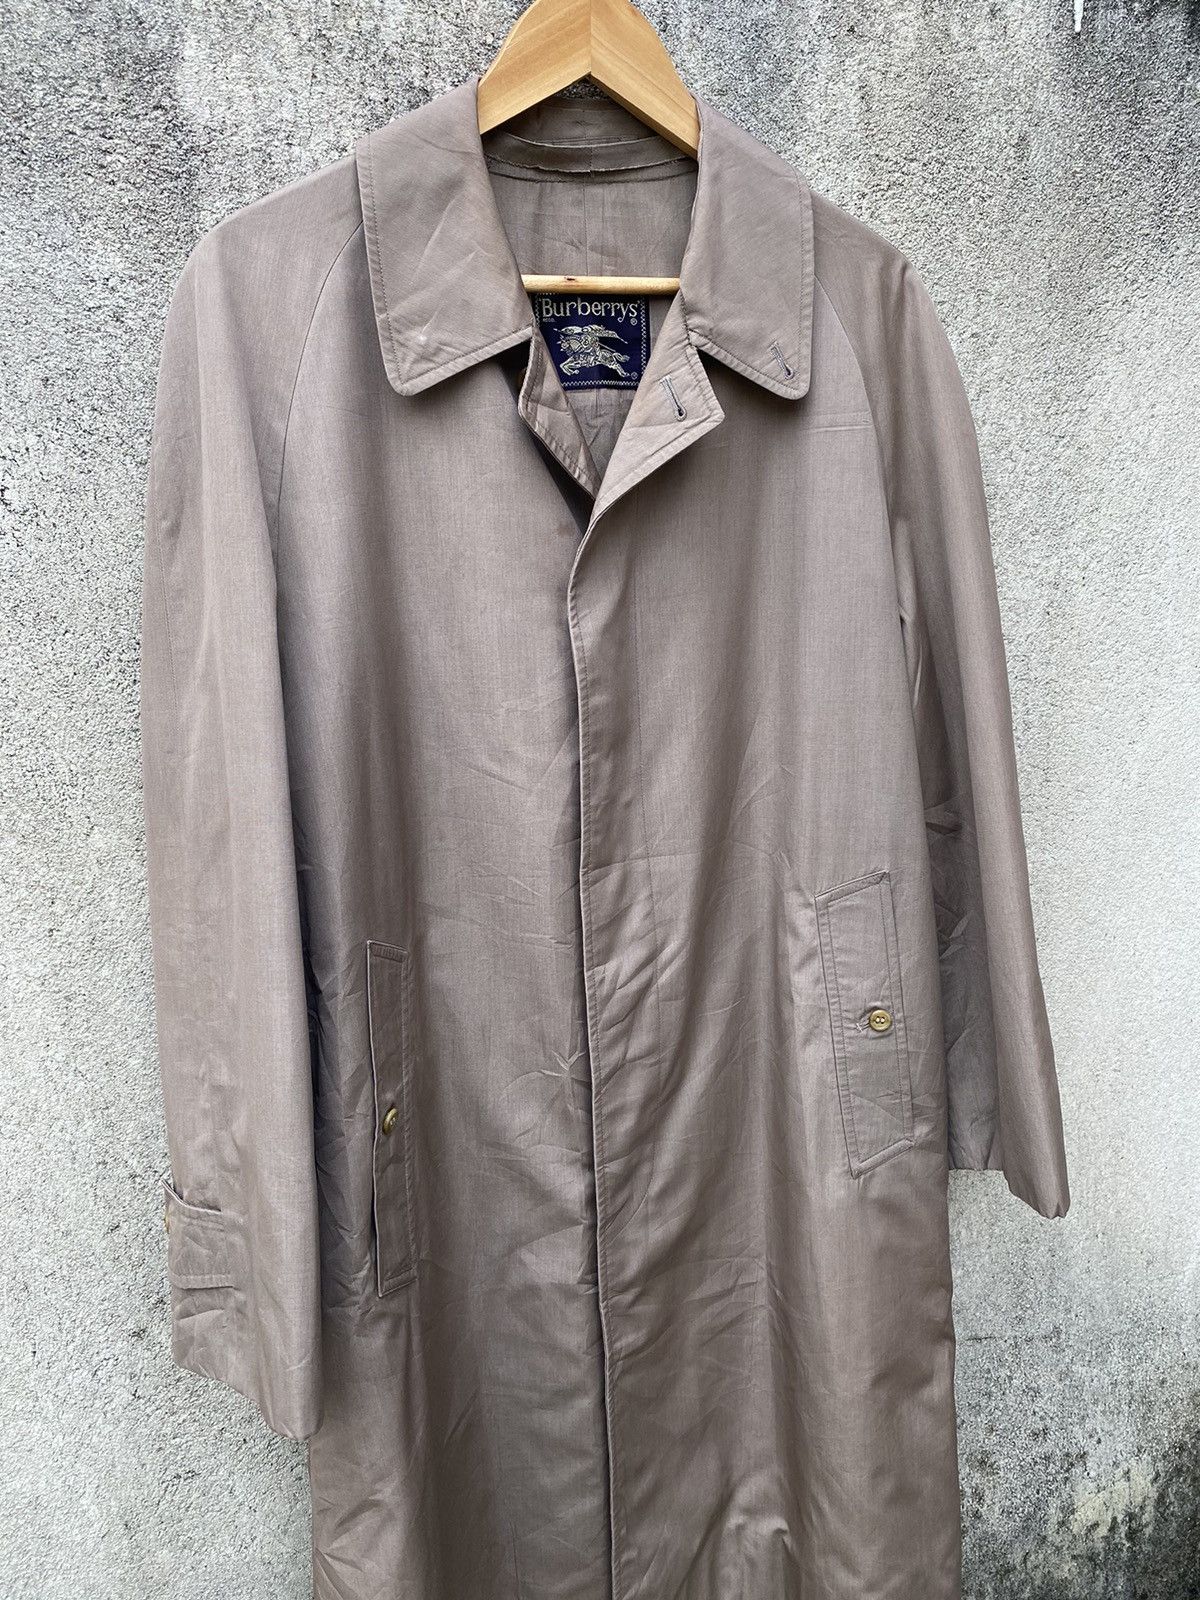 Burberry Trench Coat Single Breasted Jacket - 4